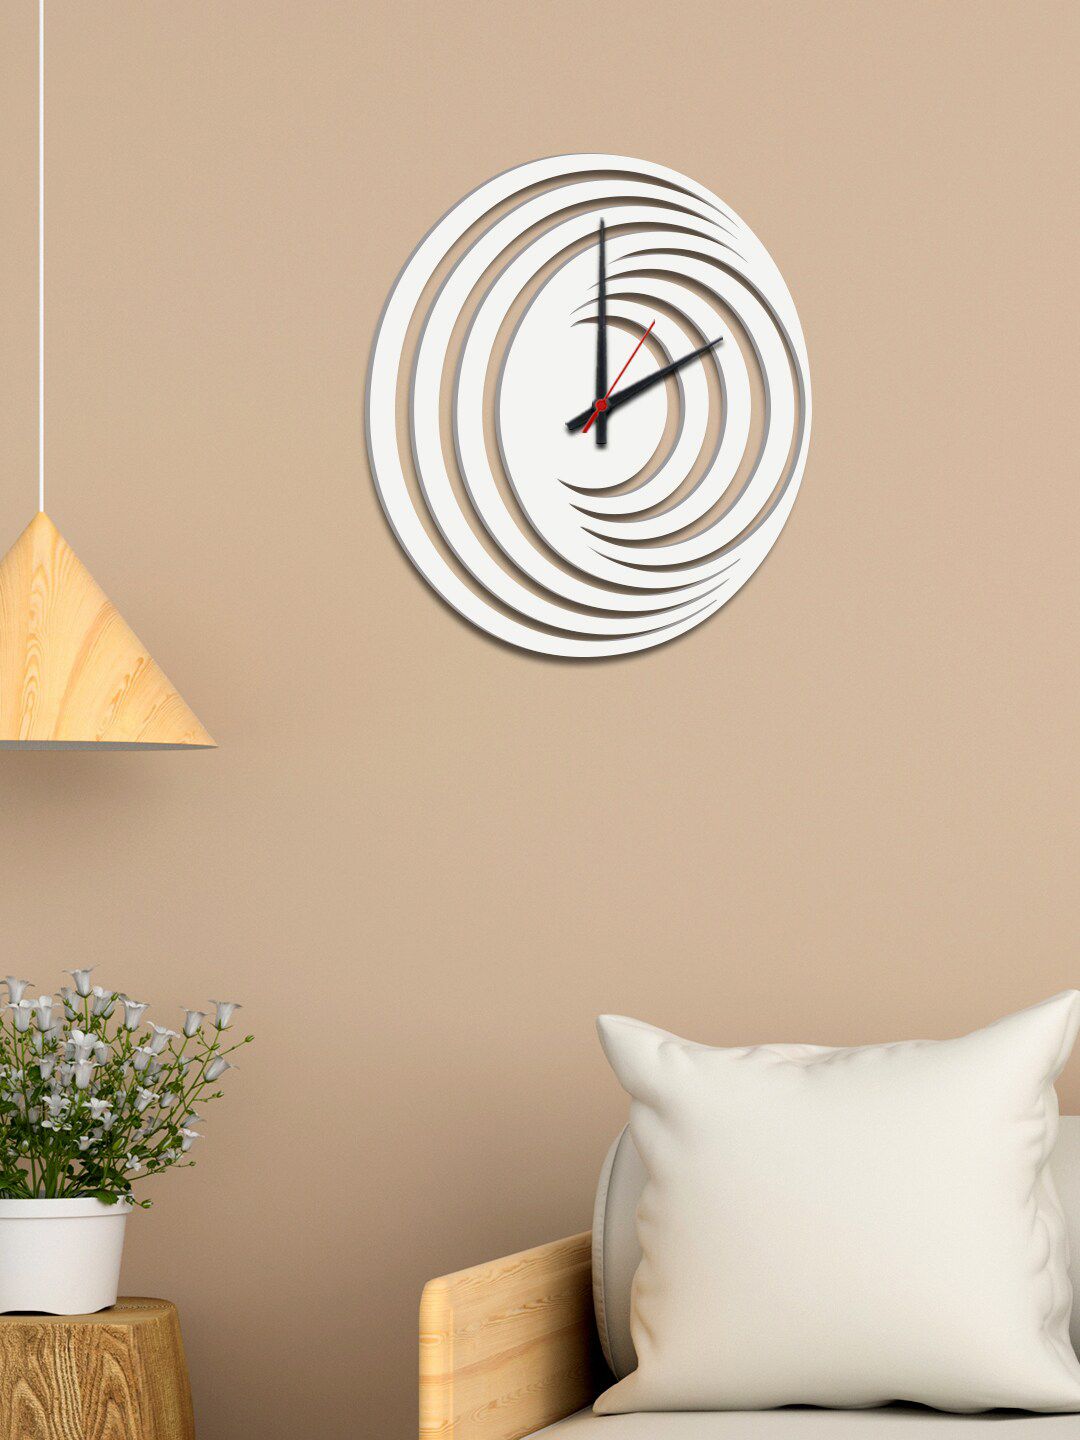 WALLMANTRA White & Grey Printed Traditional Wall Clock Price in India